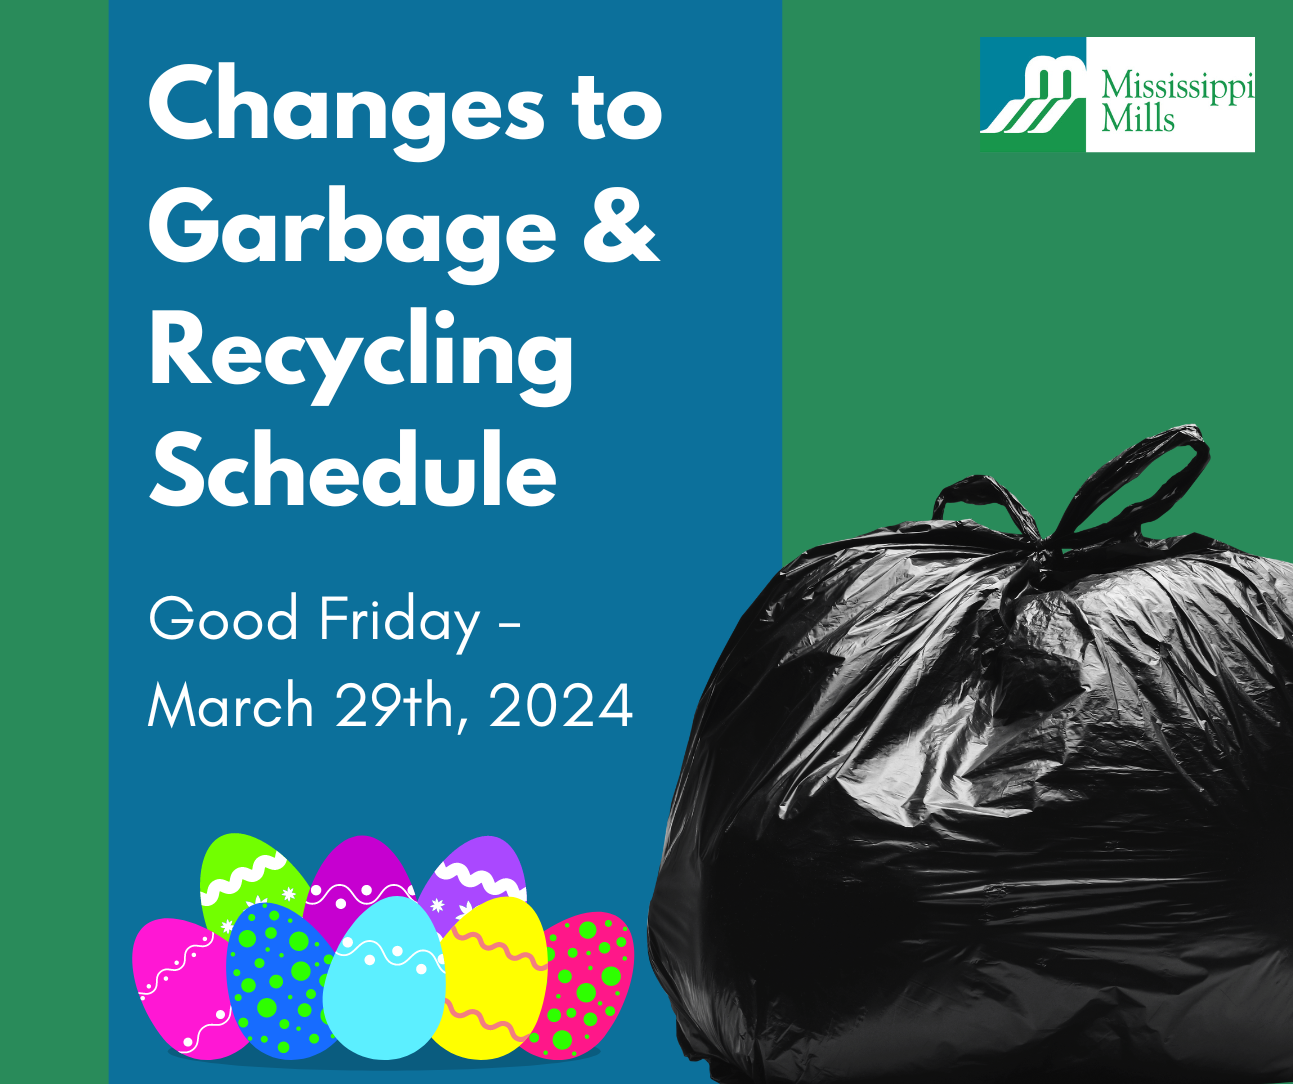 Green and blue graphic with Easter eggs and a garbage bag featuring the text: Changes to Garbage & Recycling Schedule'